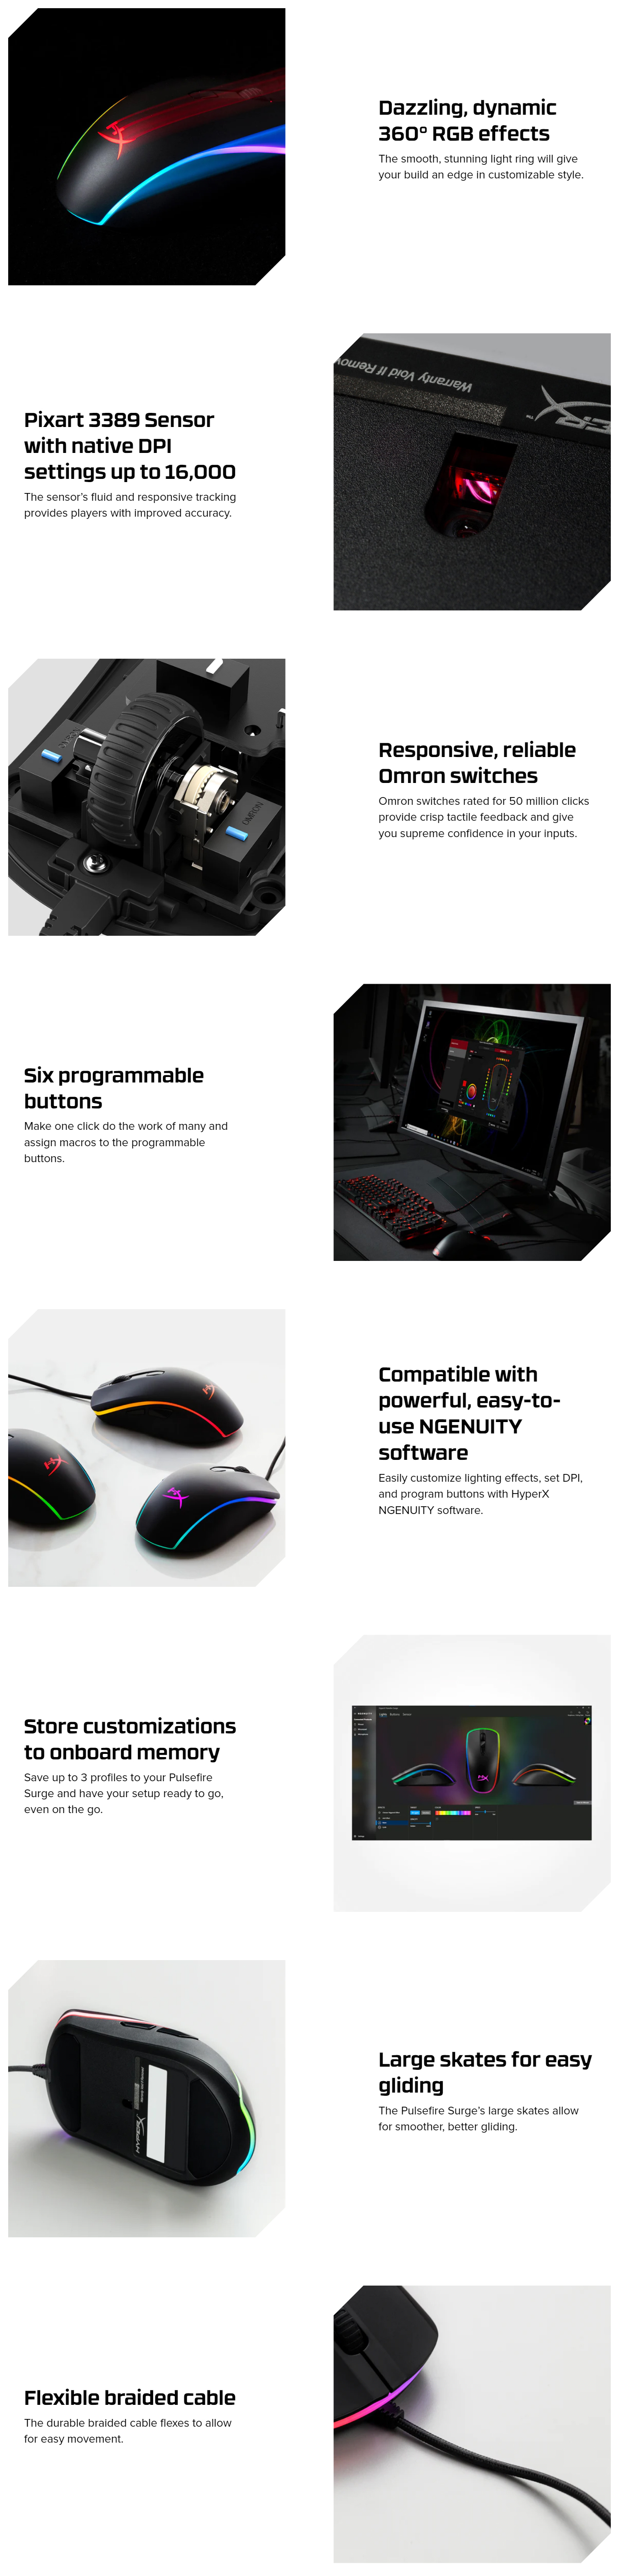 HyperX-Pulsefire-Surge-RGB-Gaming-Mouse-2